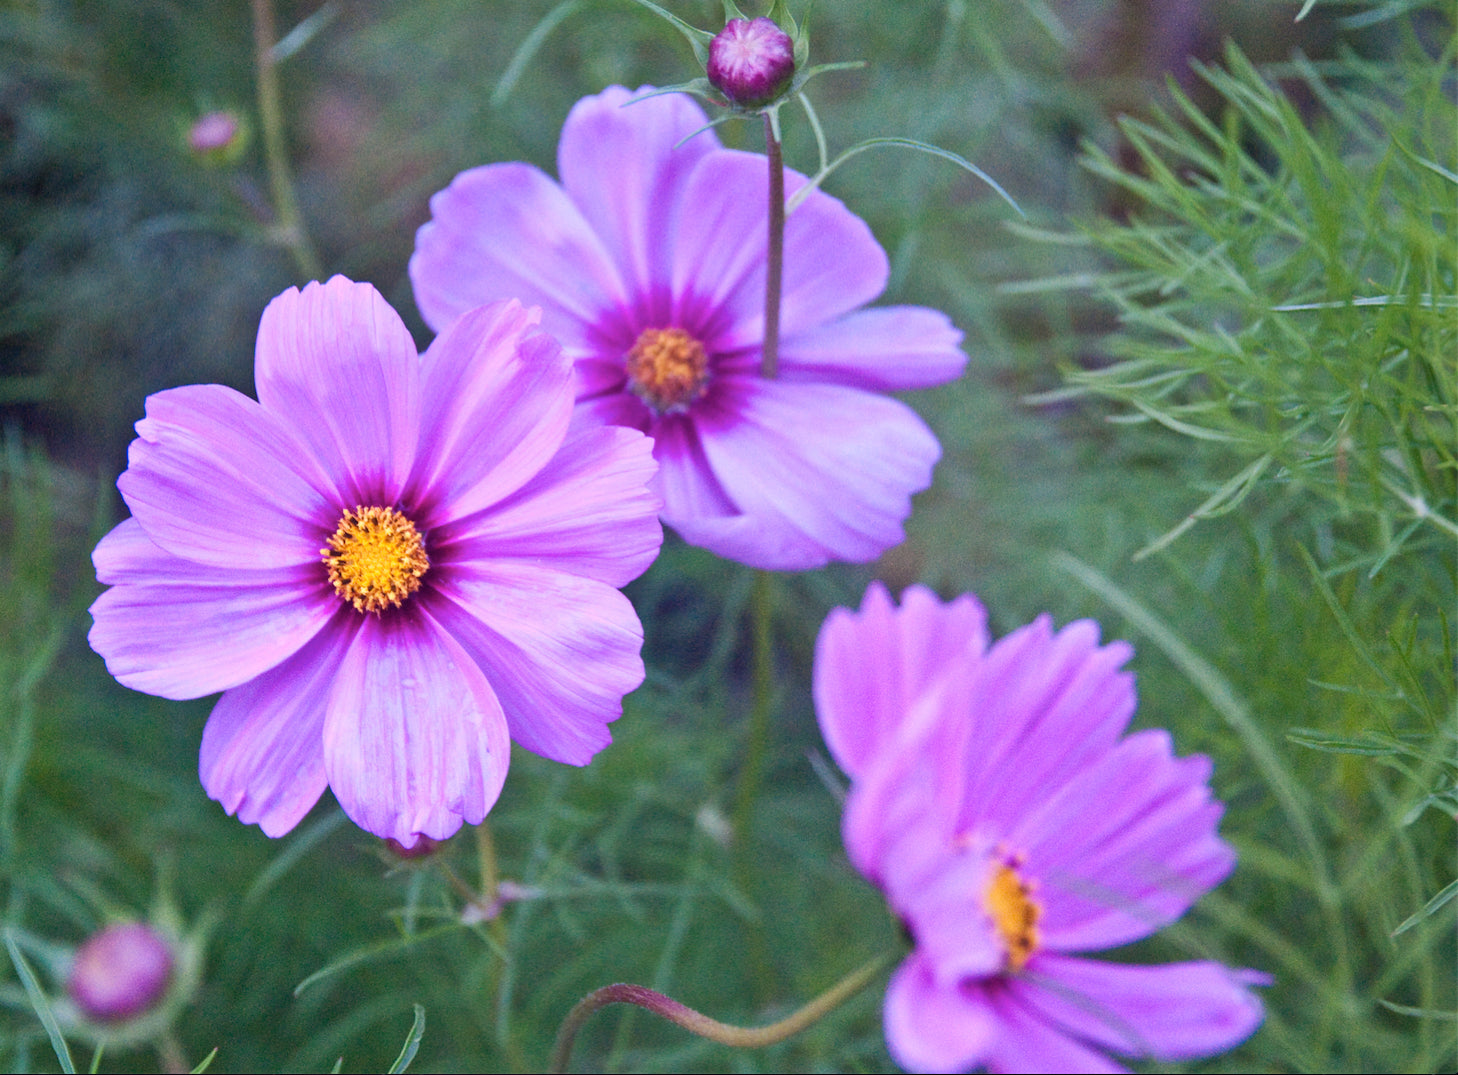 Brim Seed Co. - Sensation Mix Cosmos Flower Seed